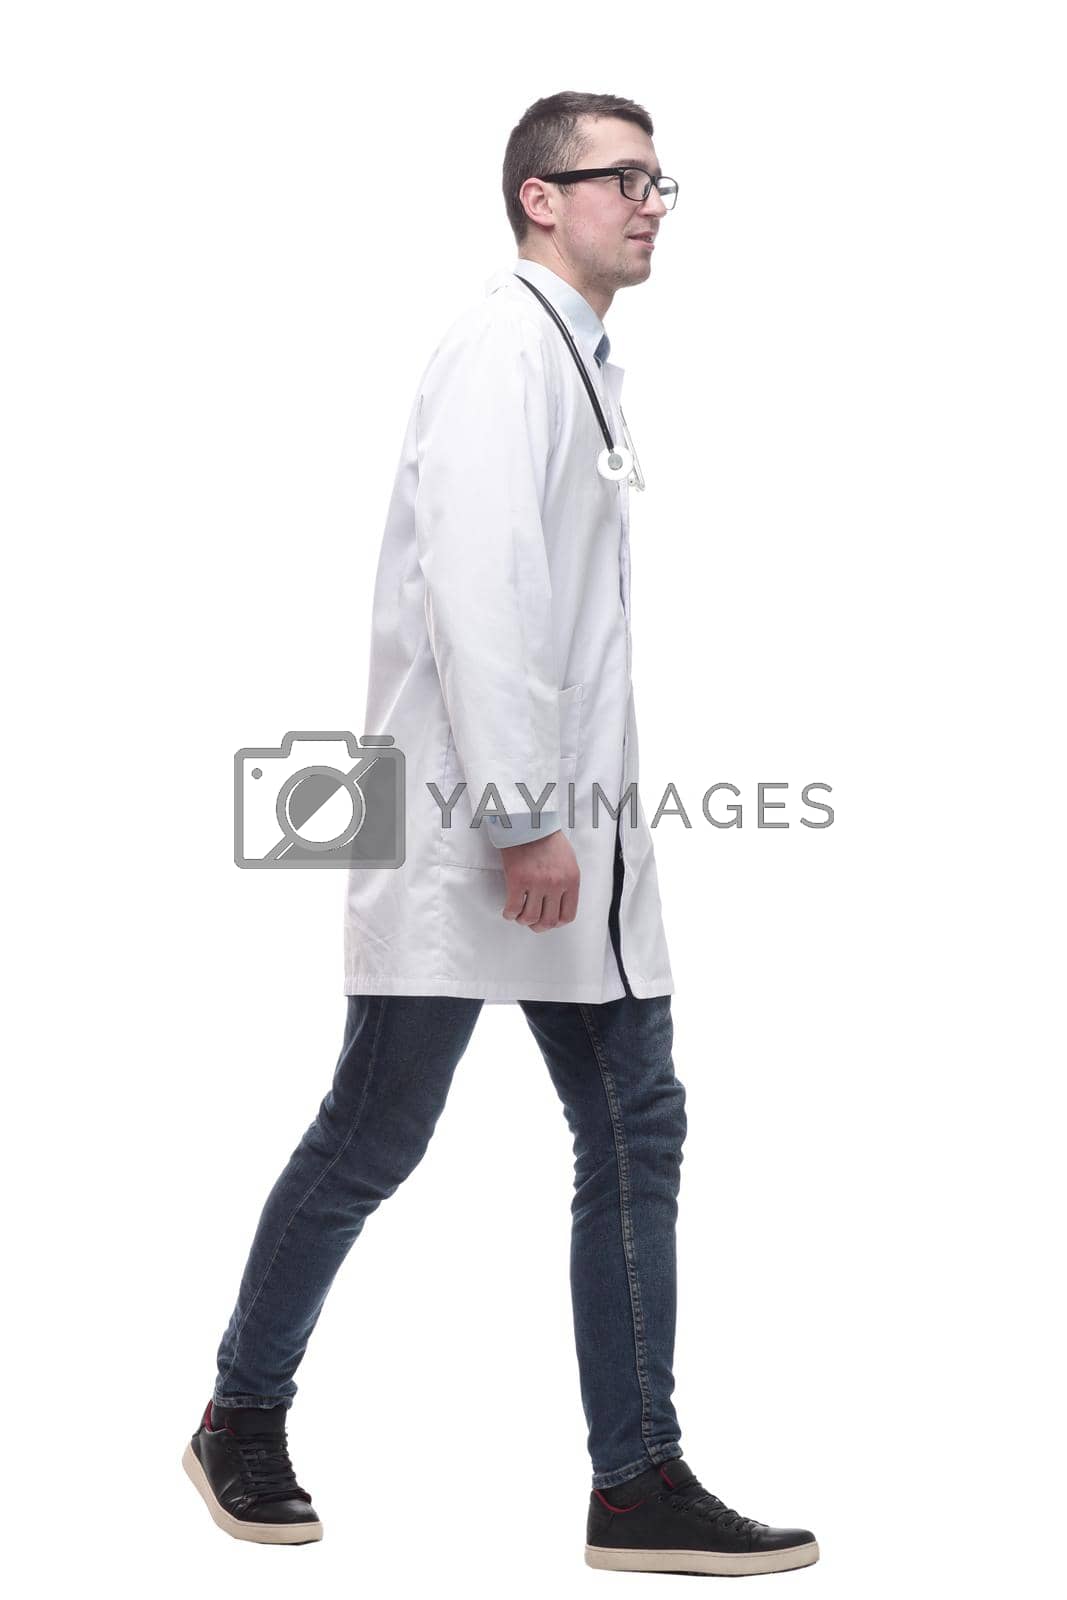 Royalty free image of doctor in a white coat striding forward. by asdf